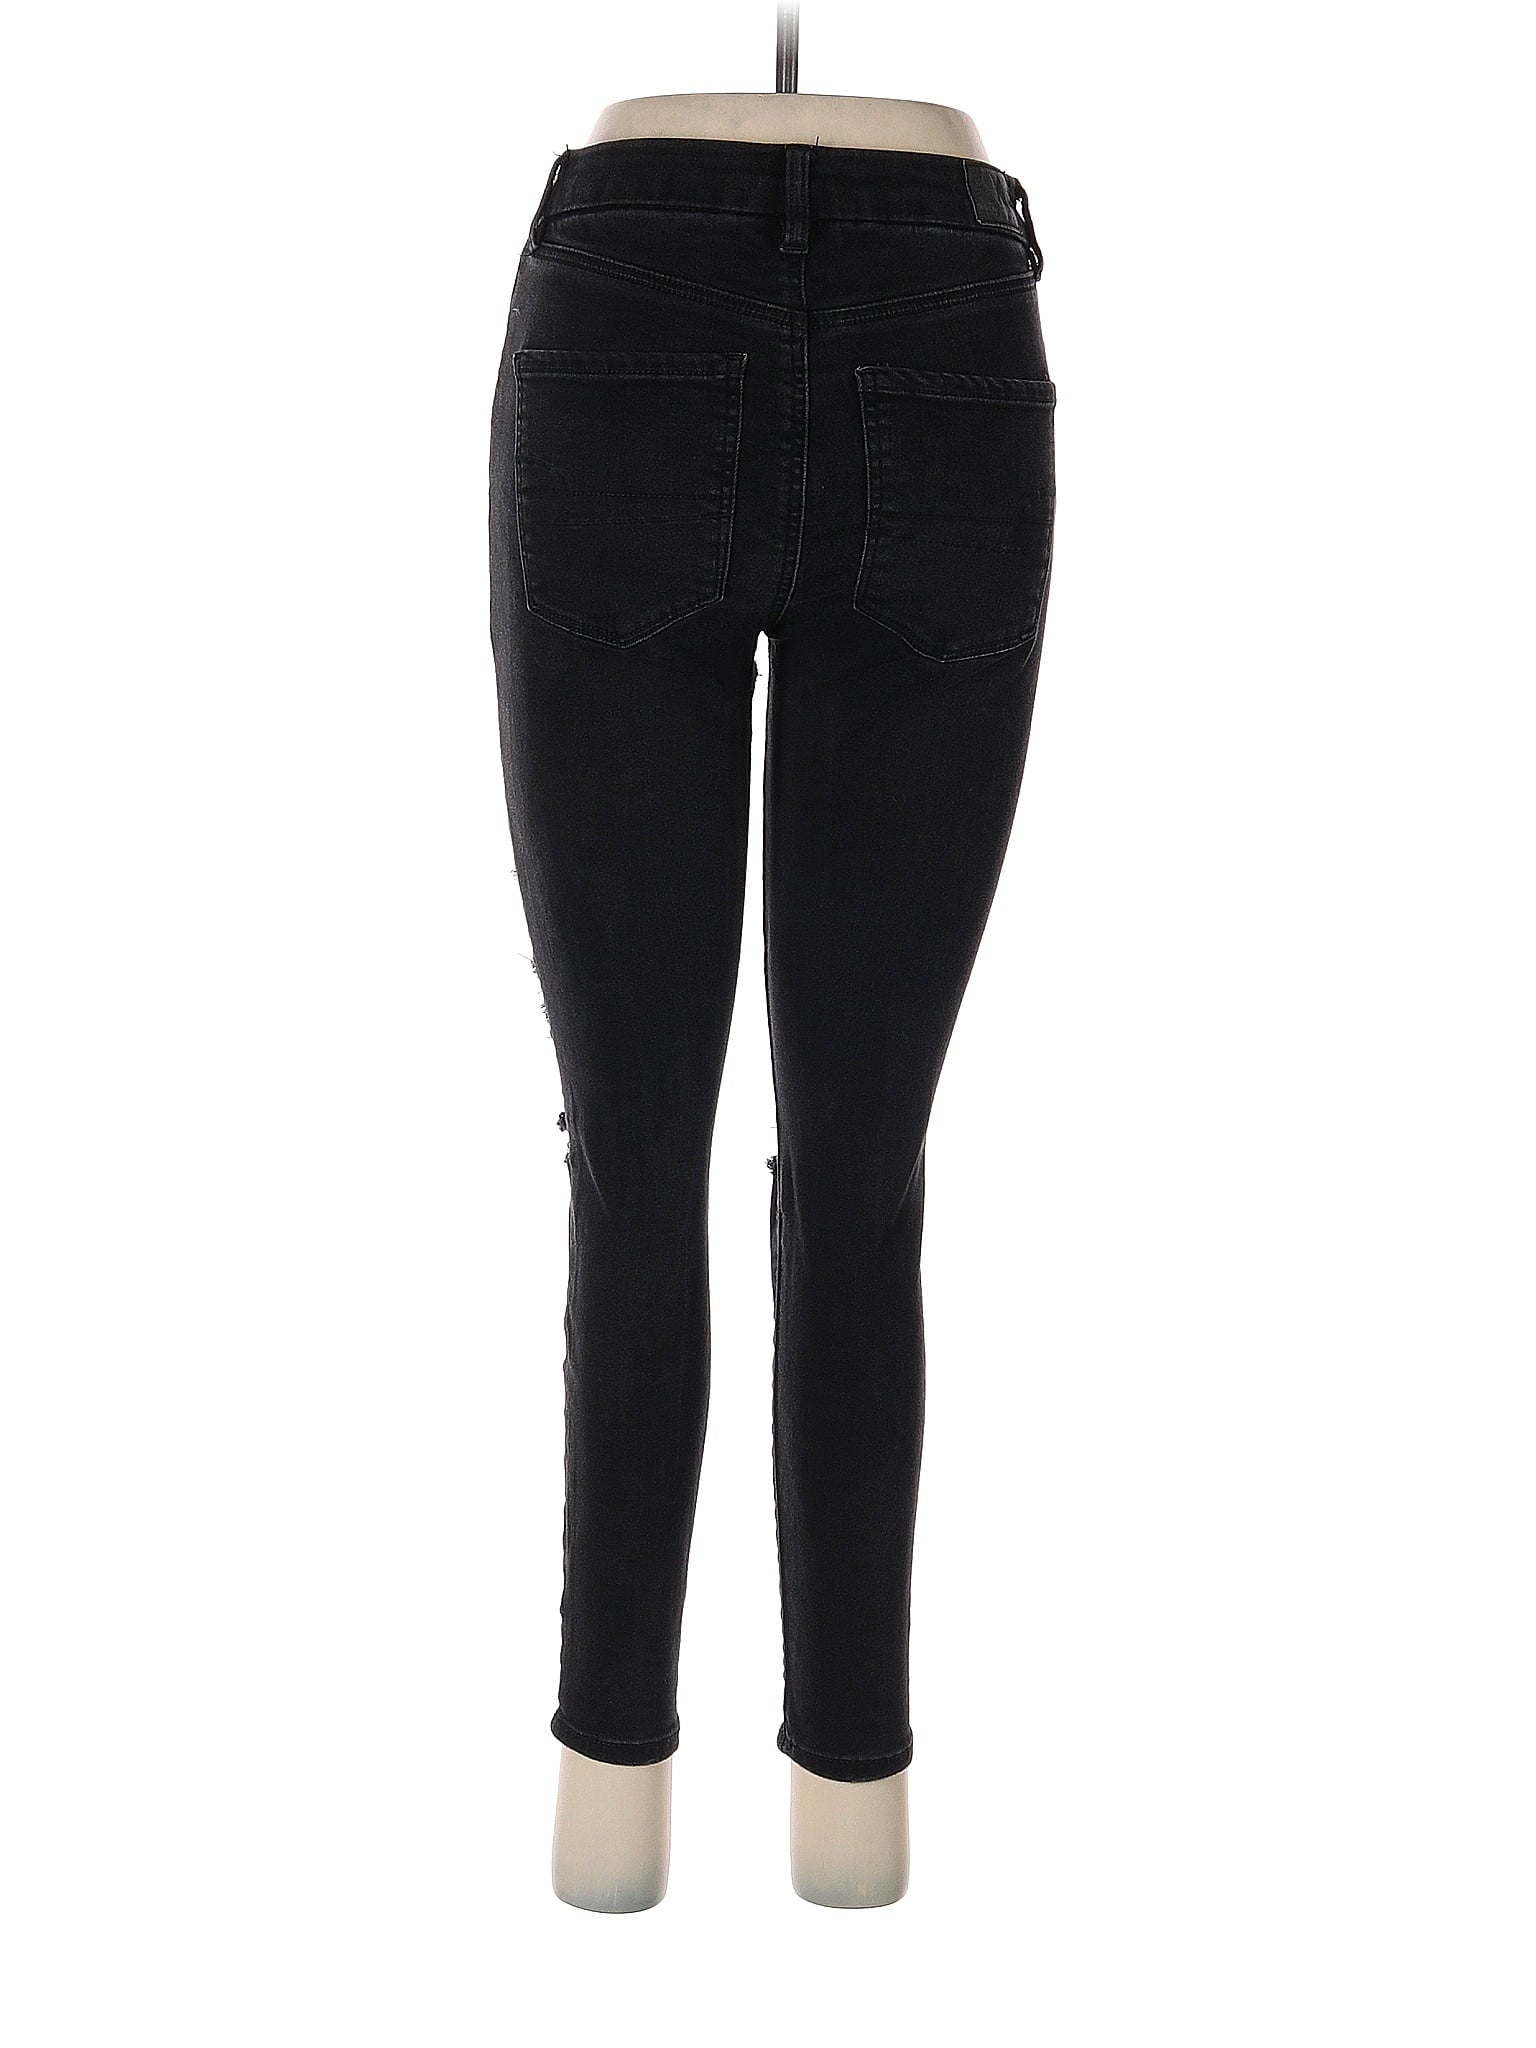 Jeggings size - 6 P